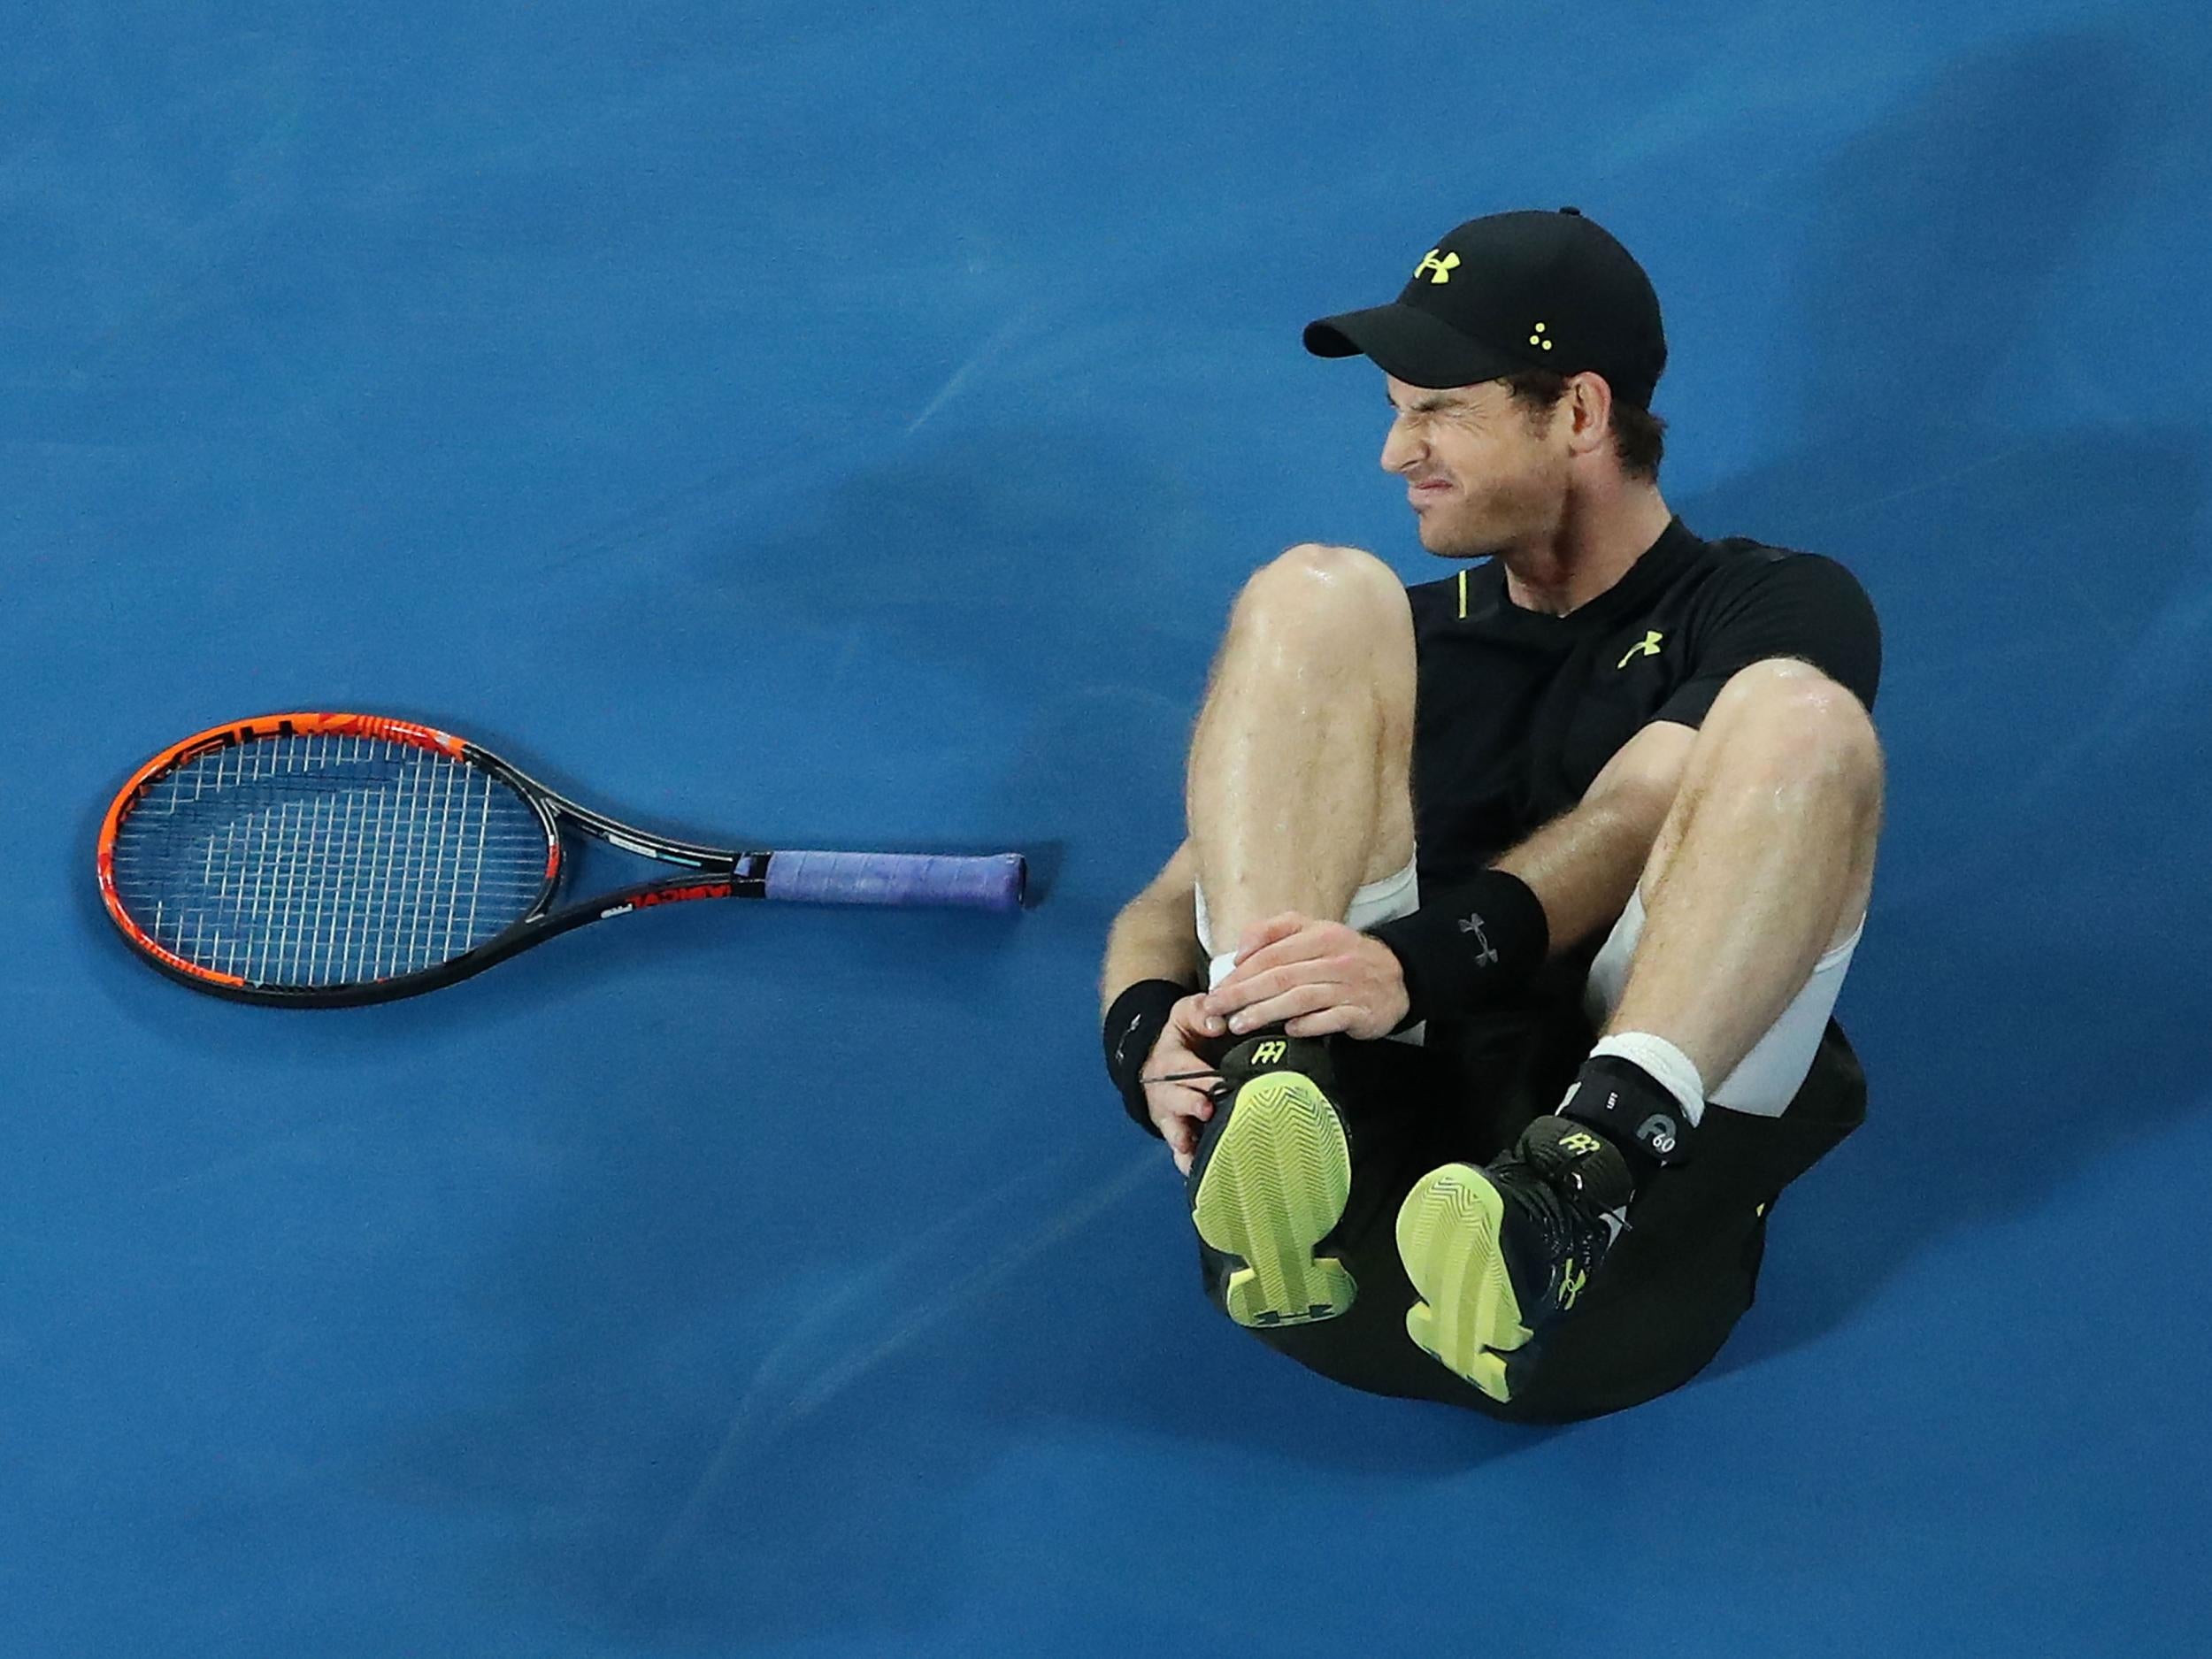 Murray fell awkwardly on his ankle in the first set